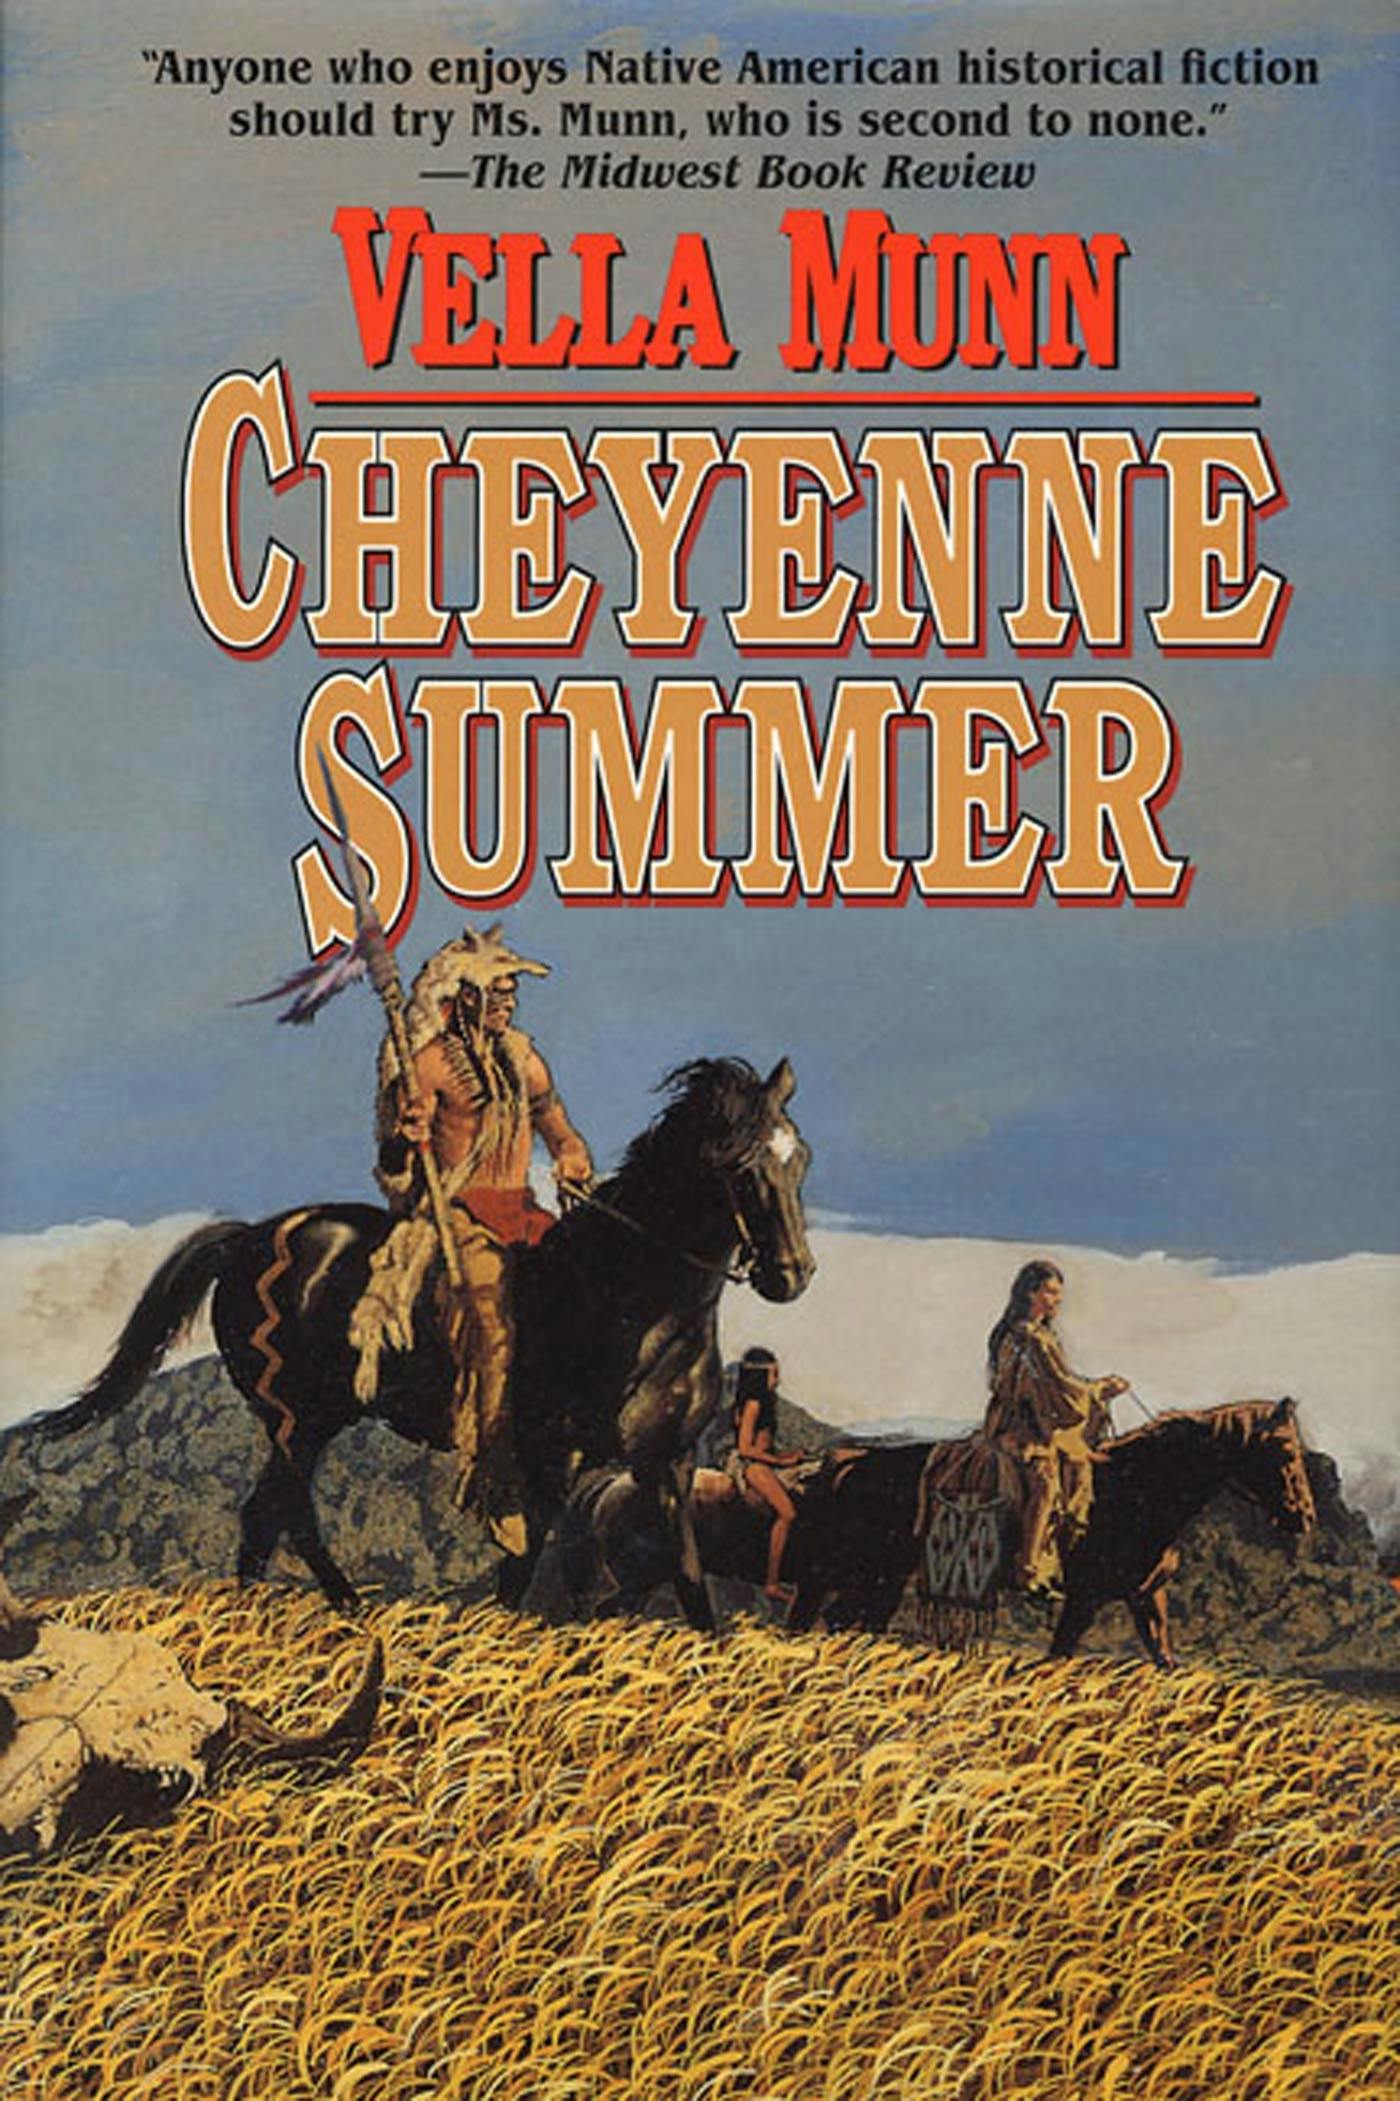 Cover for the book titled as: Cheyenne Summer